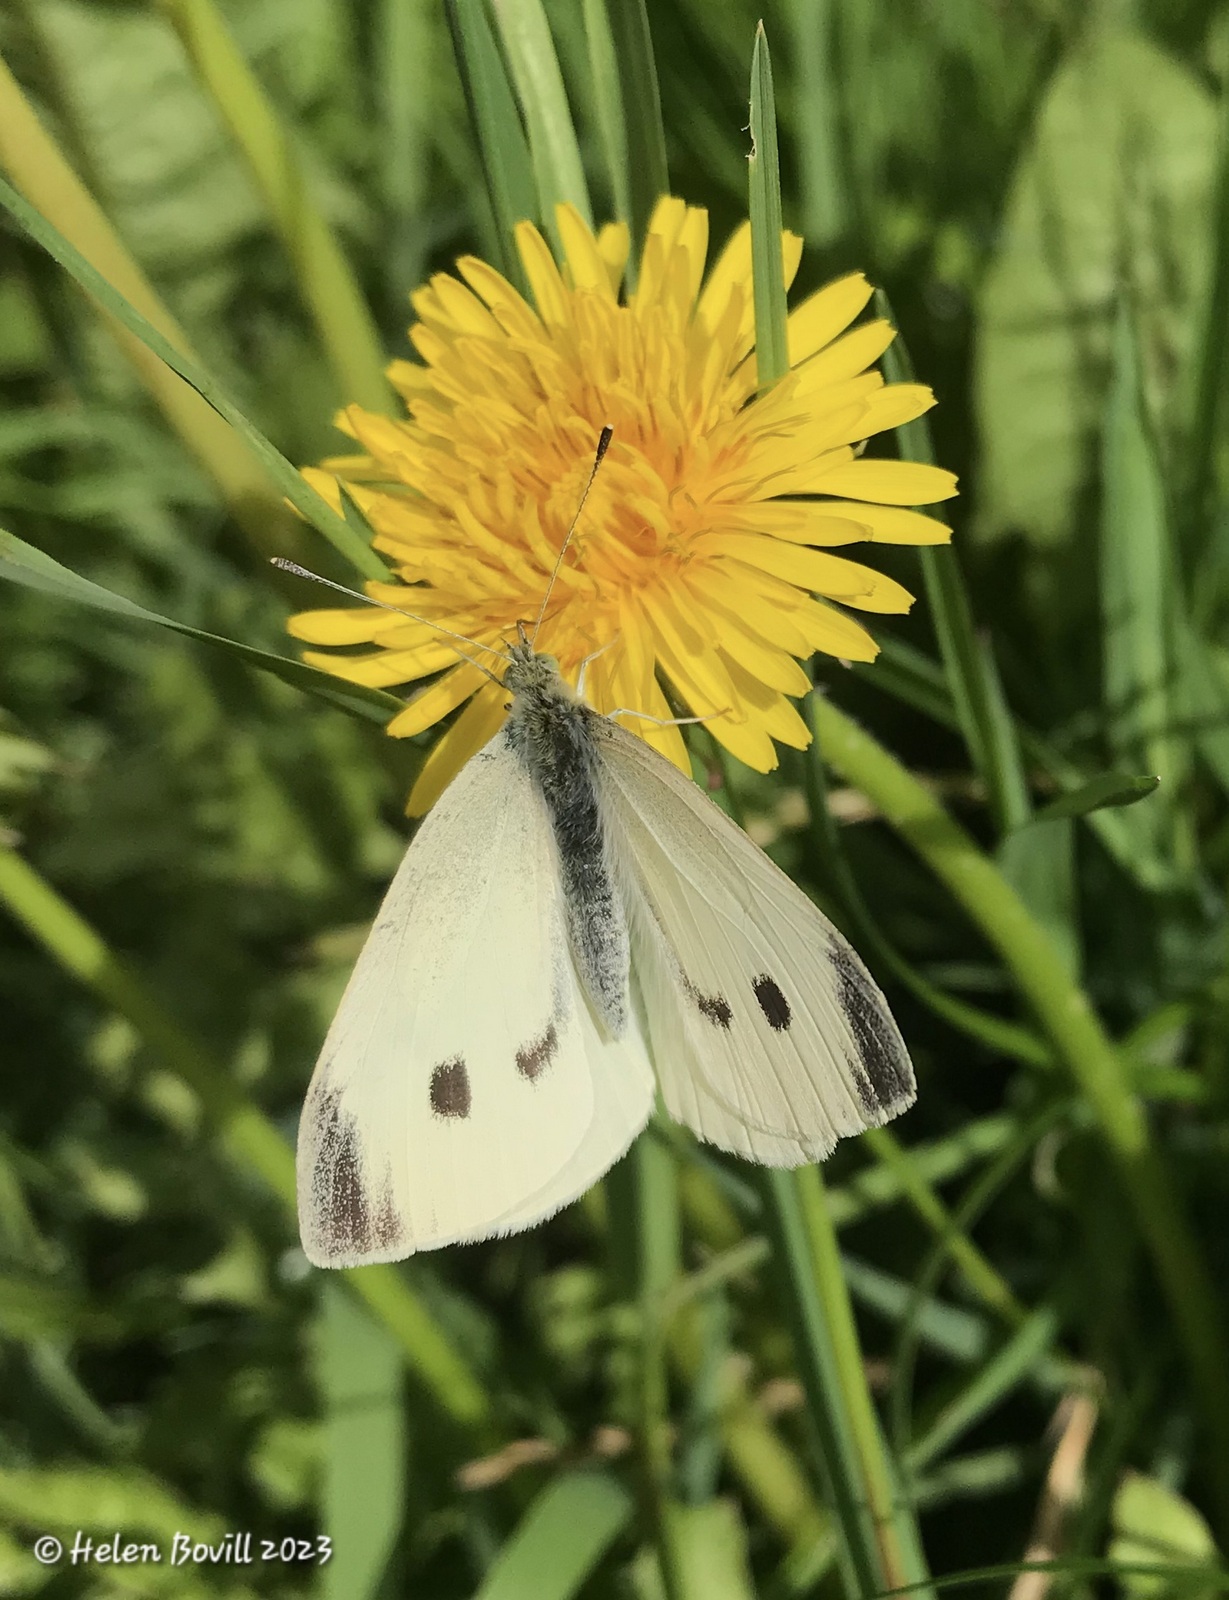 A female small white butterfly resting on a dandelion